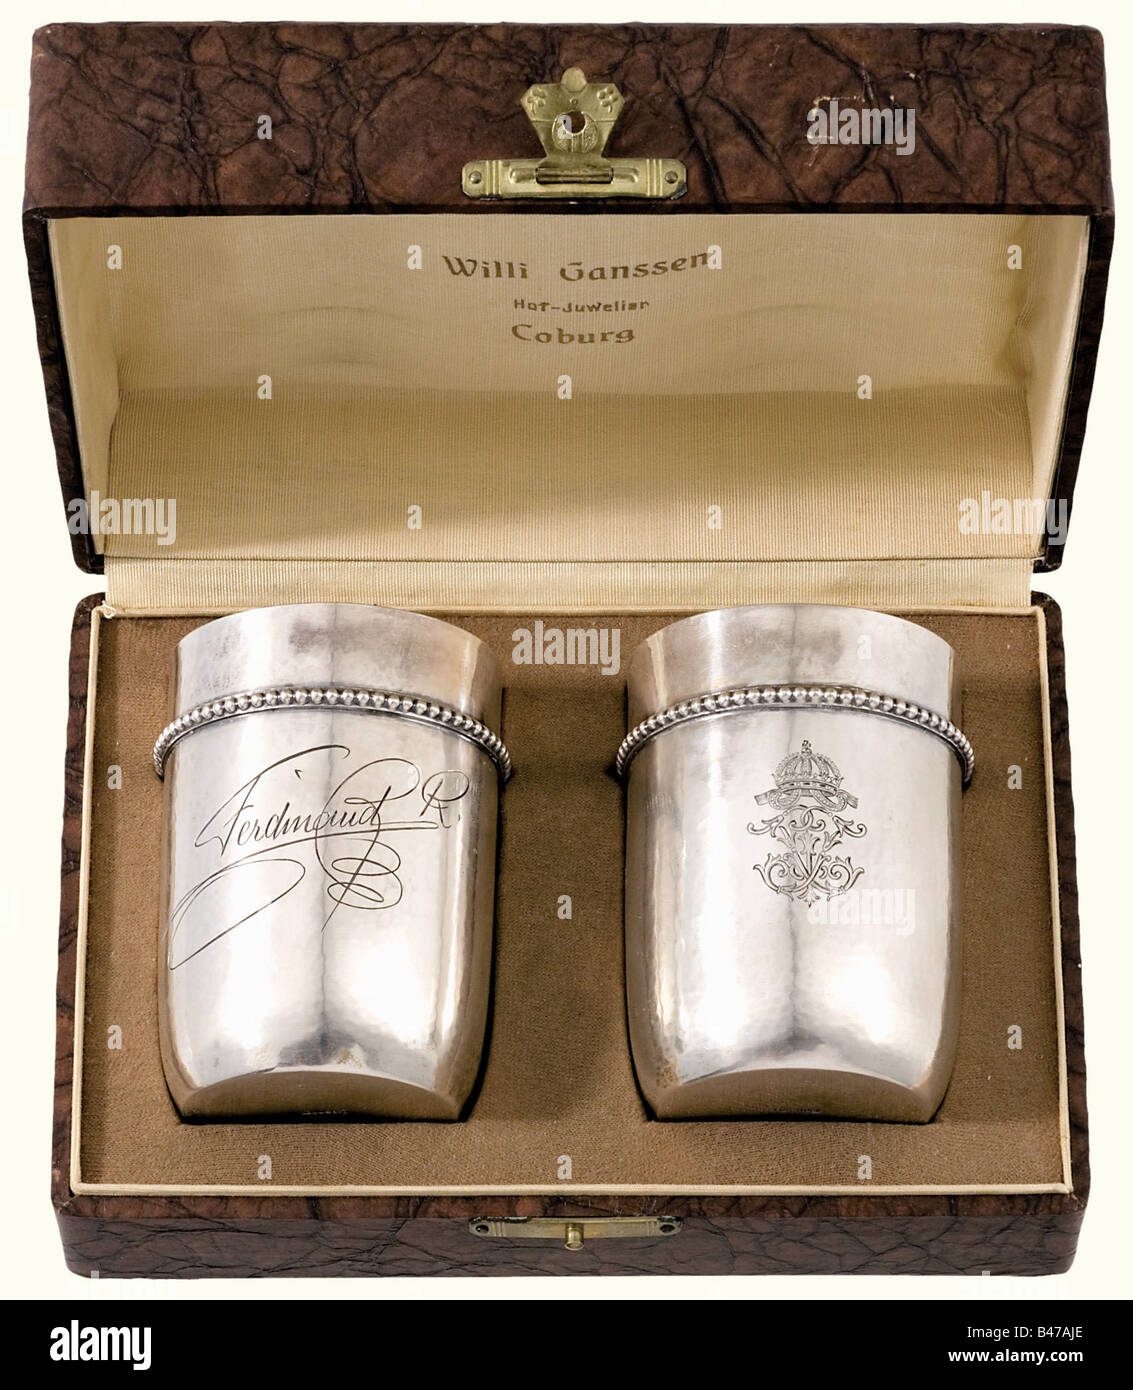 Tsar Ferdinand I of Bulgaria (1861 - 1948), a pair of silver presentation bowls in a case Hand hammered bowls with gold plated interiors and friezes of bead moulding under the lip of the rims. On the front of each the engraved cipher beneath the Bulgarian crown, and on the reverse side, one bowl has the engraved signature 'Ferdinand R.' the other has an illegible signature. German hallmark '800' next to the crescent moon and crown along with the number '33' on the bottom. Height of each 75 mm. Weights 68 and 70 grams. In a case with a crowned cipher superimpose, Stock Photo